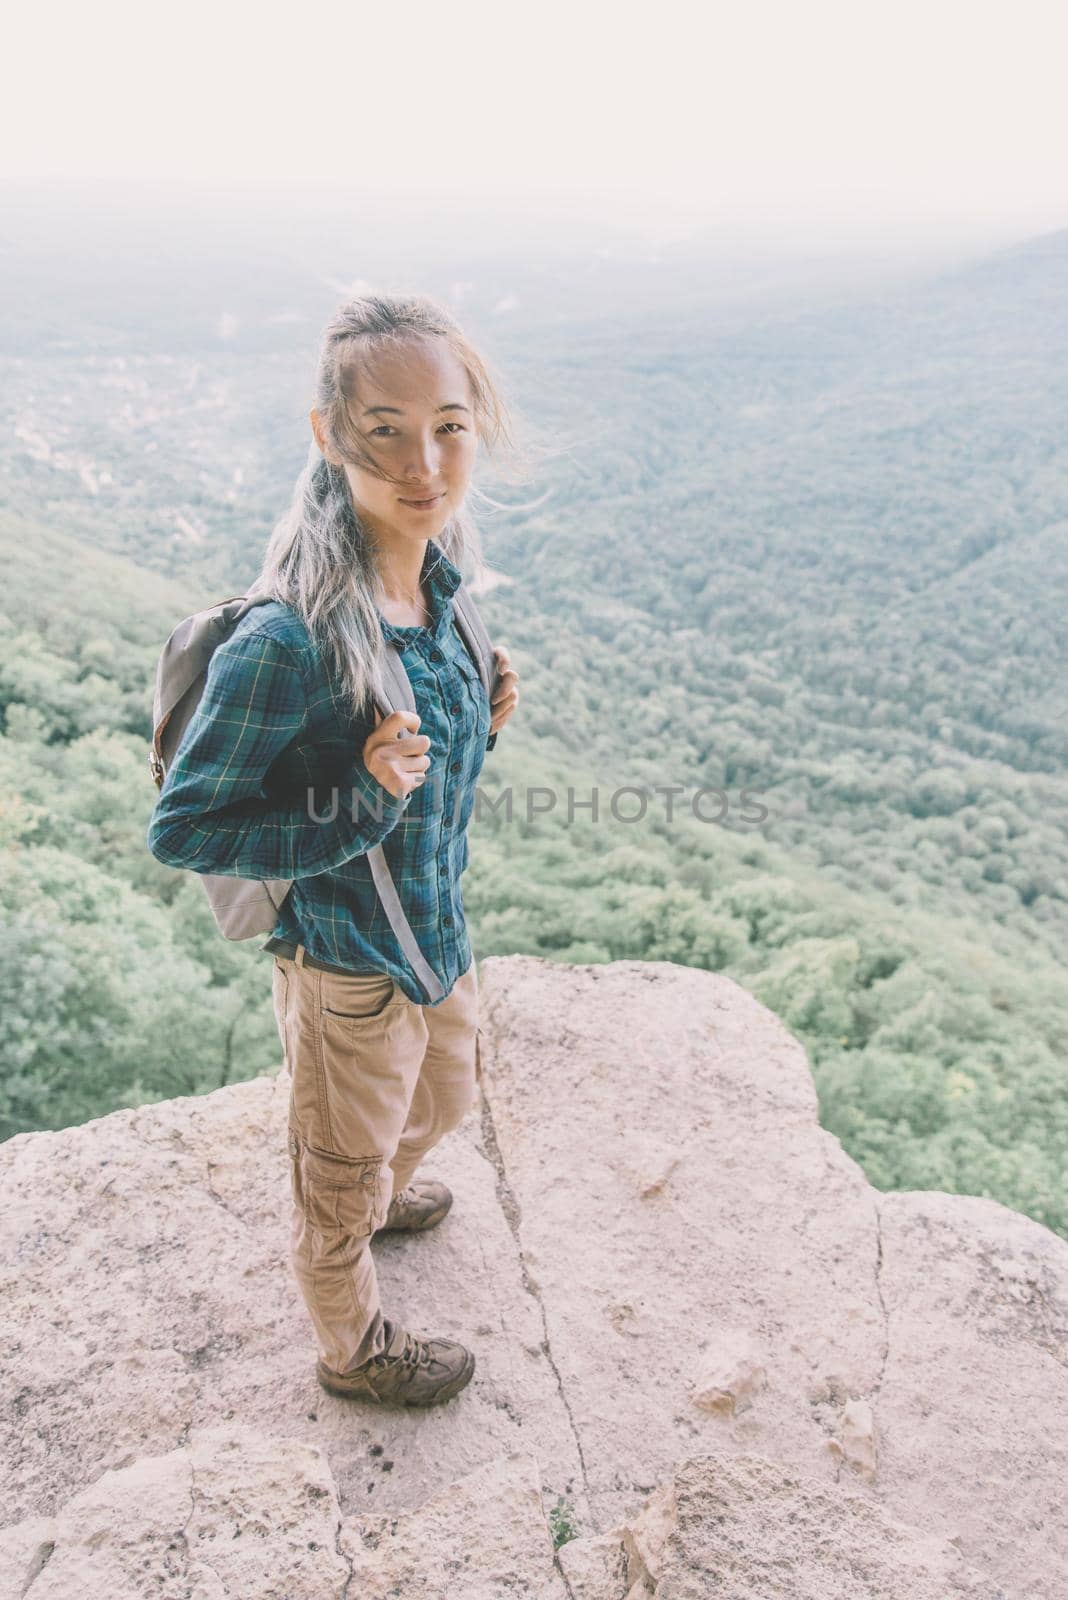 Traveler young woman with backpack standing on high cliff over summer valley, looking at camera.